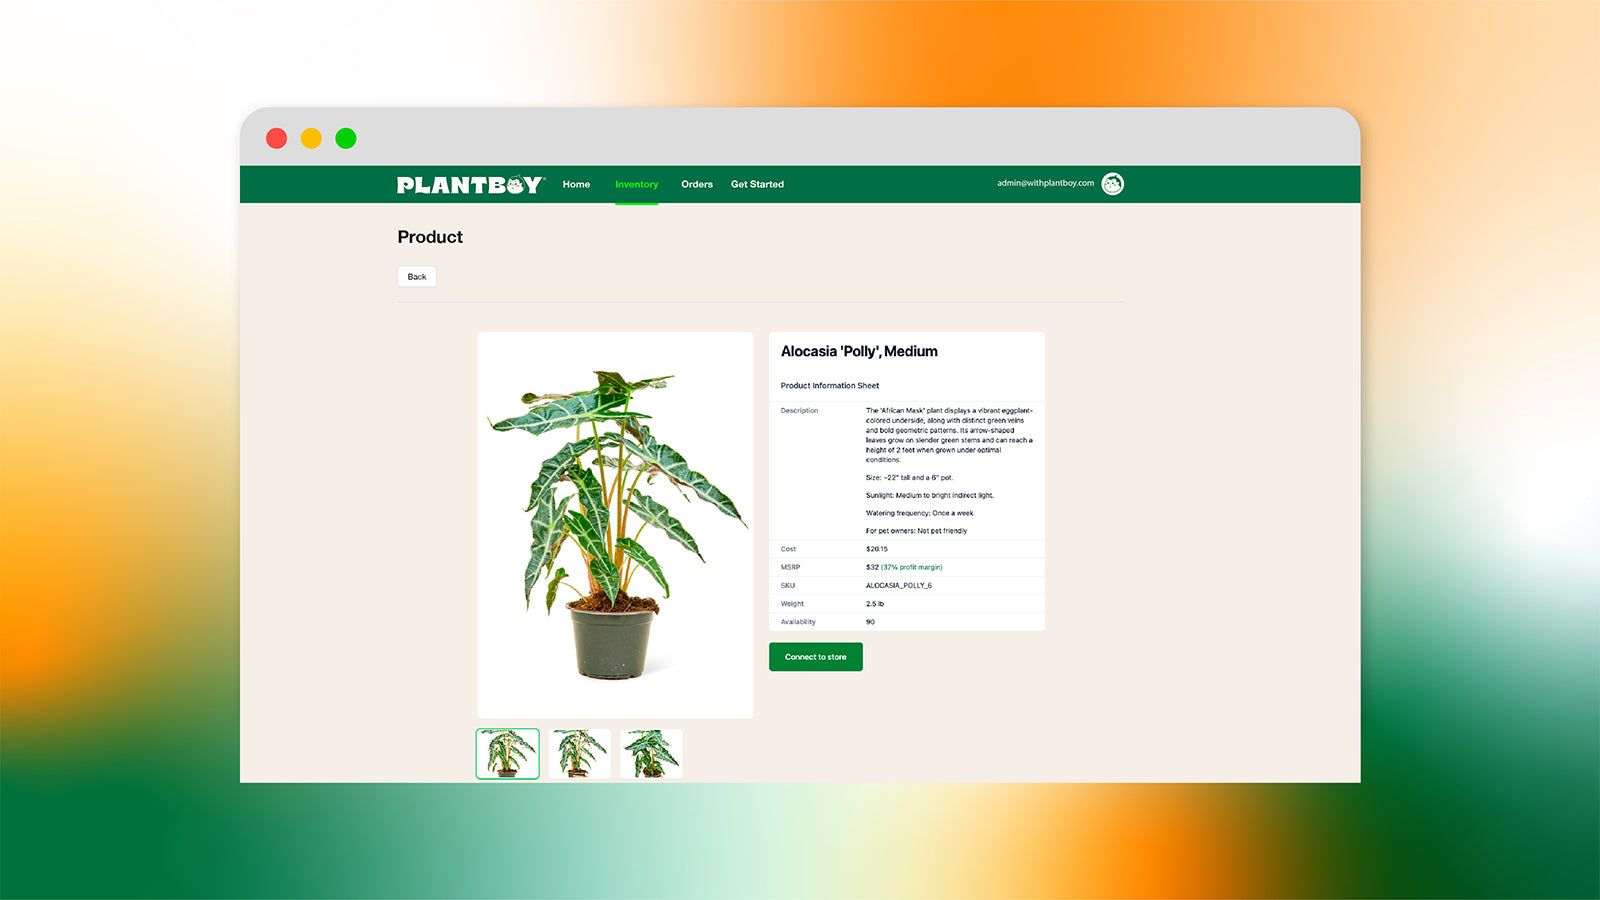 Screenshot of the product page in the Plantboy application